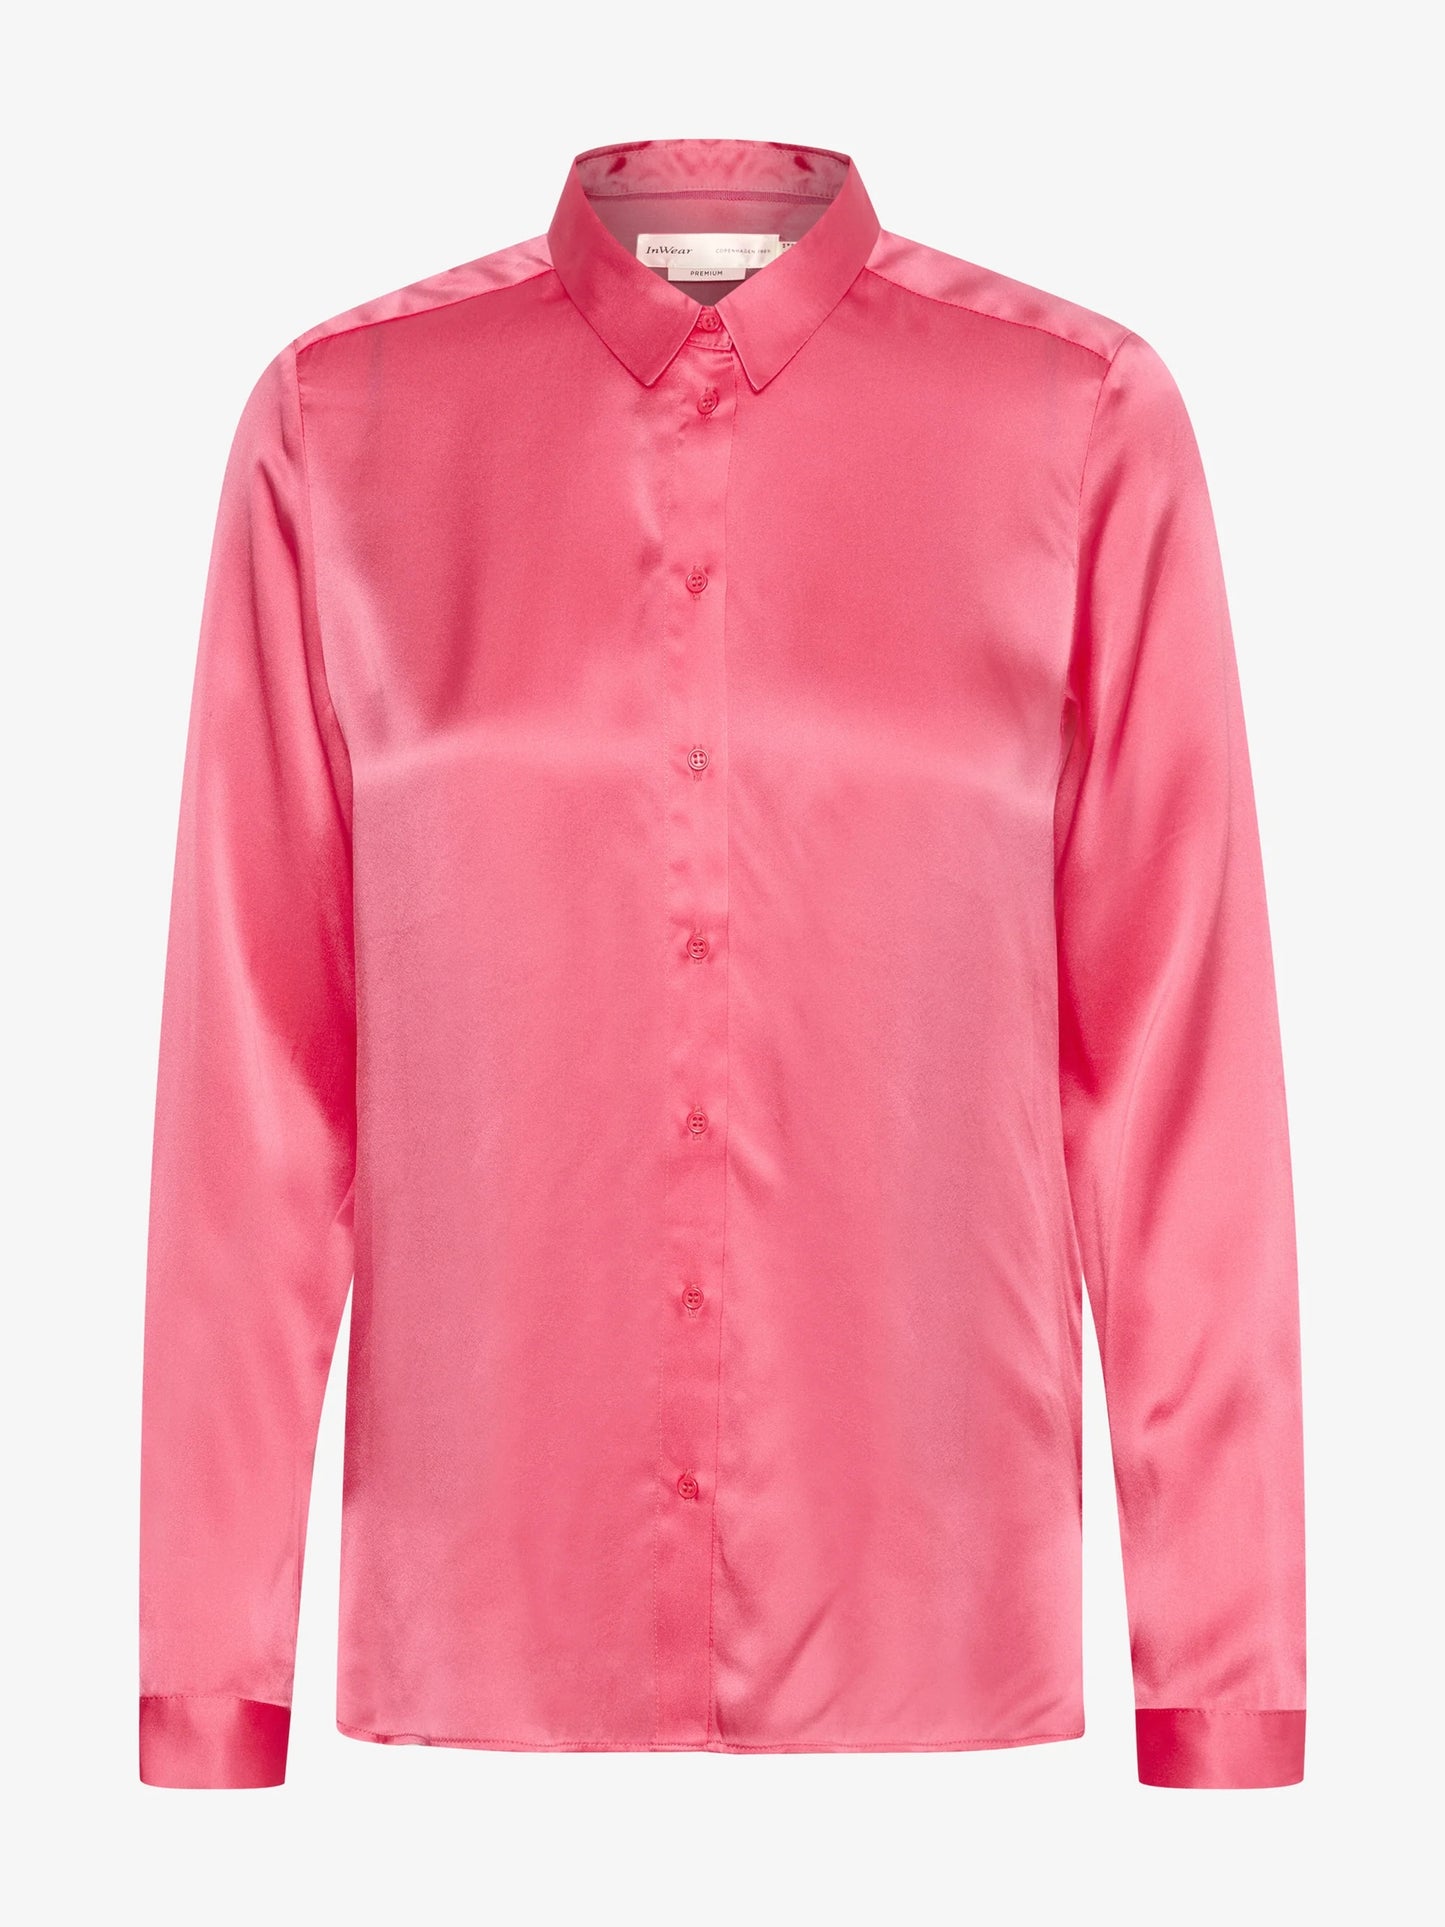 Seidenbluse Leonore IW pink rose